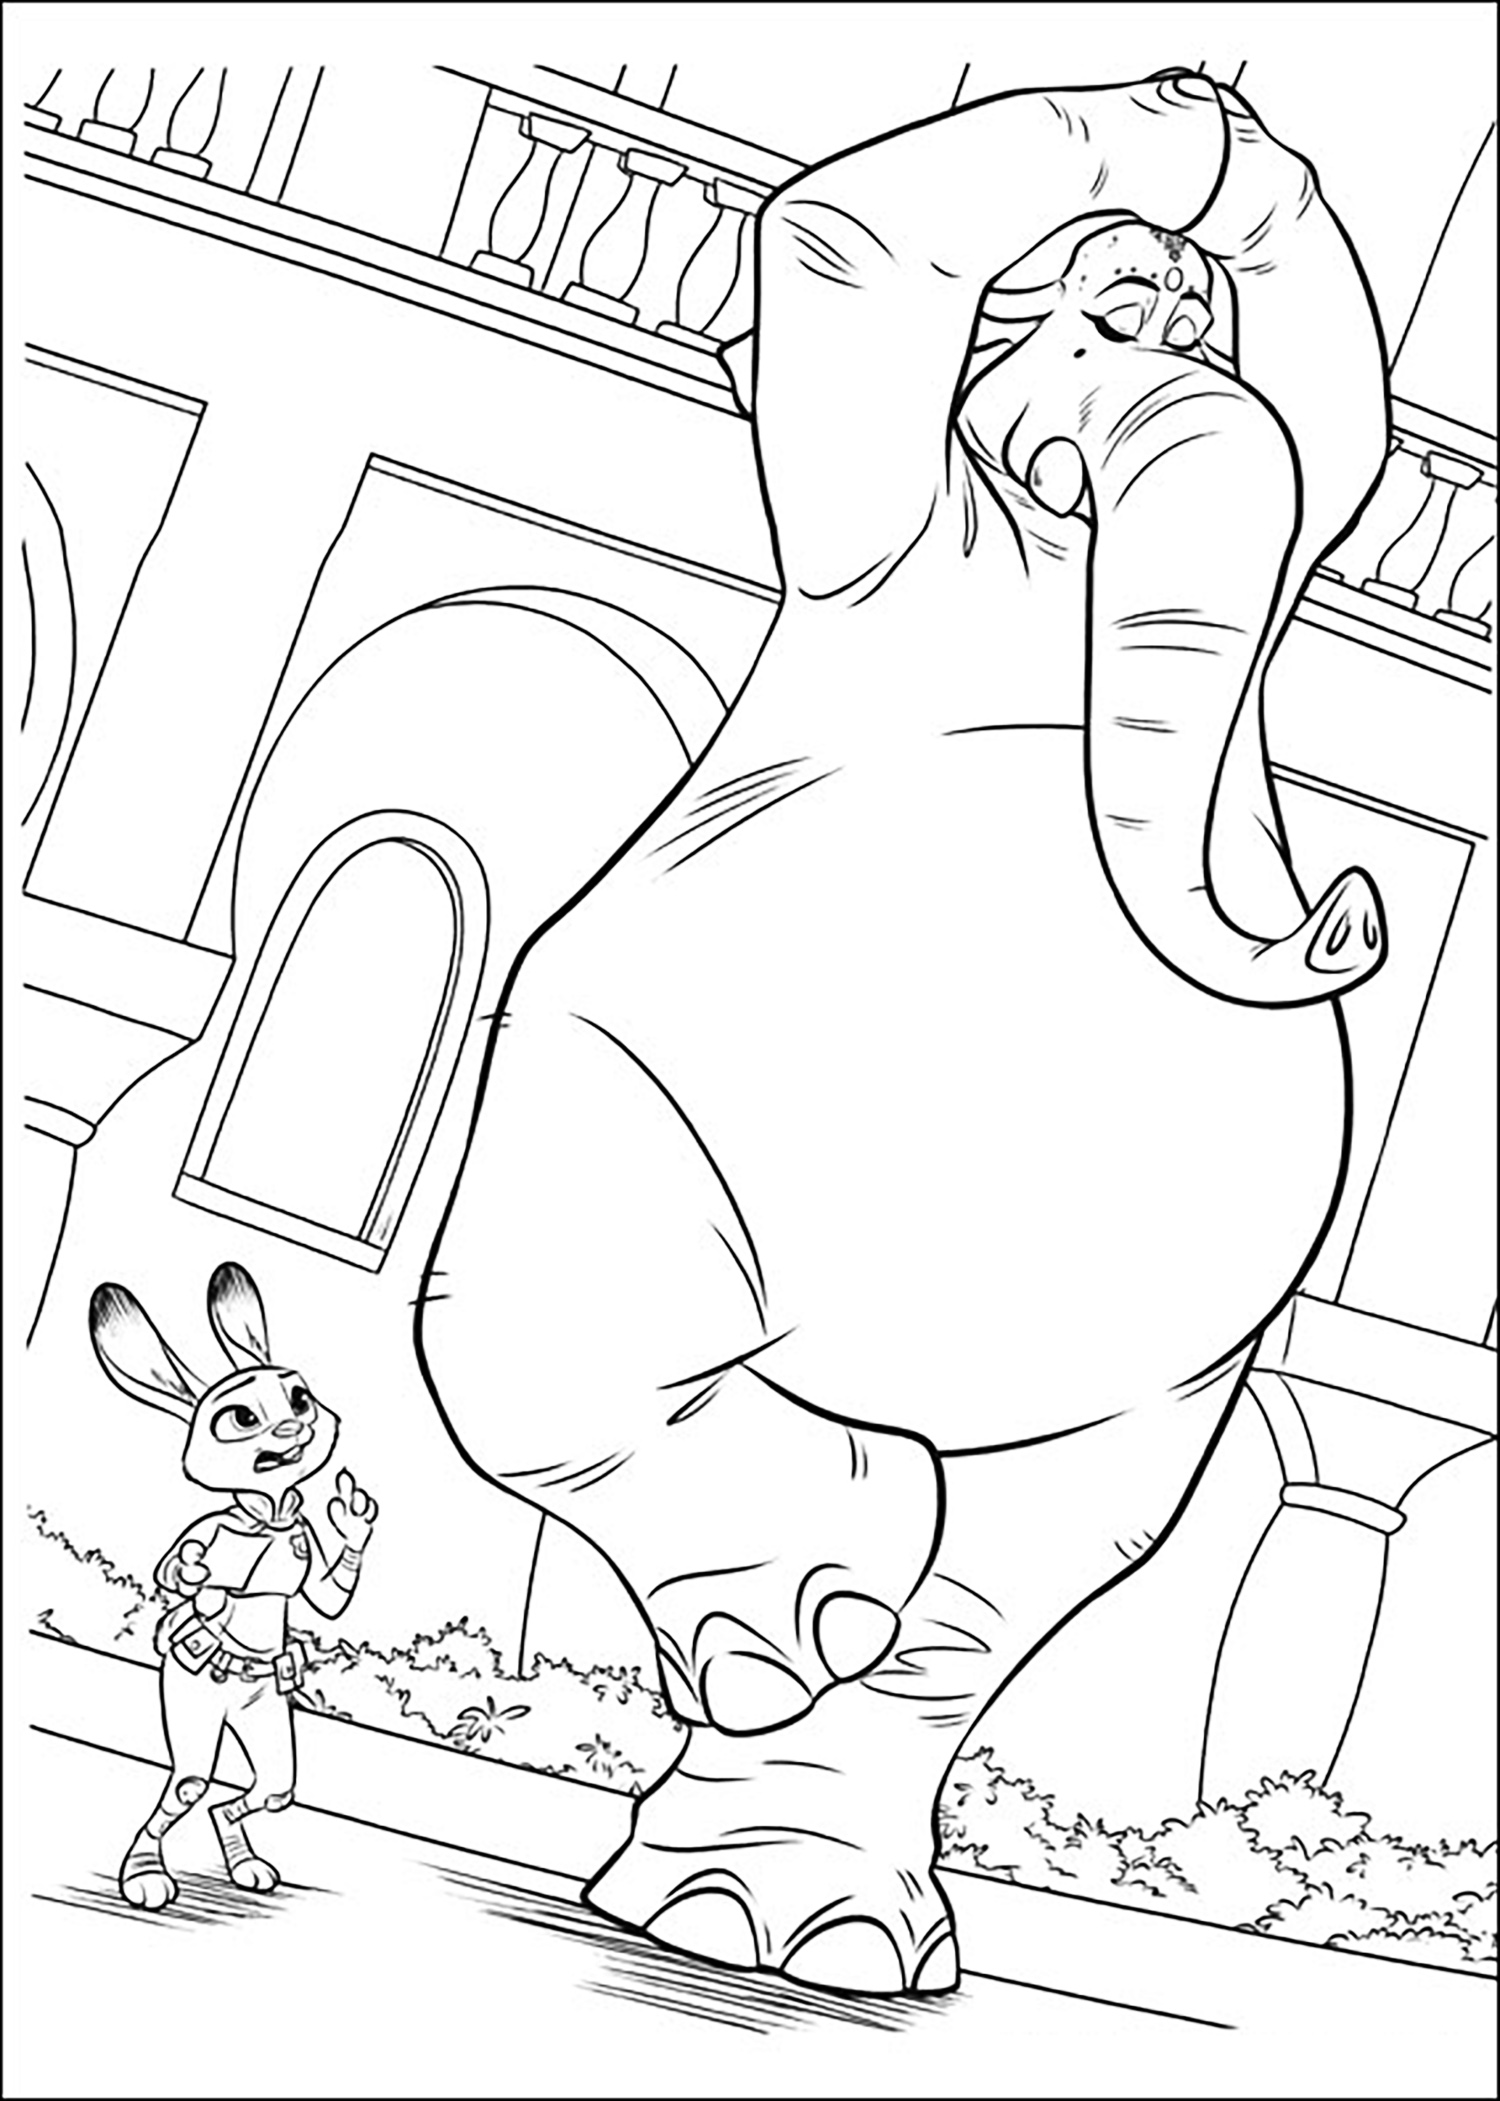 Simple Zootopia coloring page : Lt. Judy Hopps and elephant